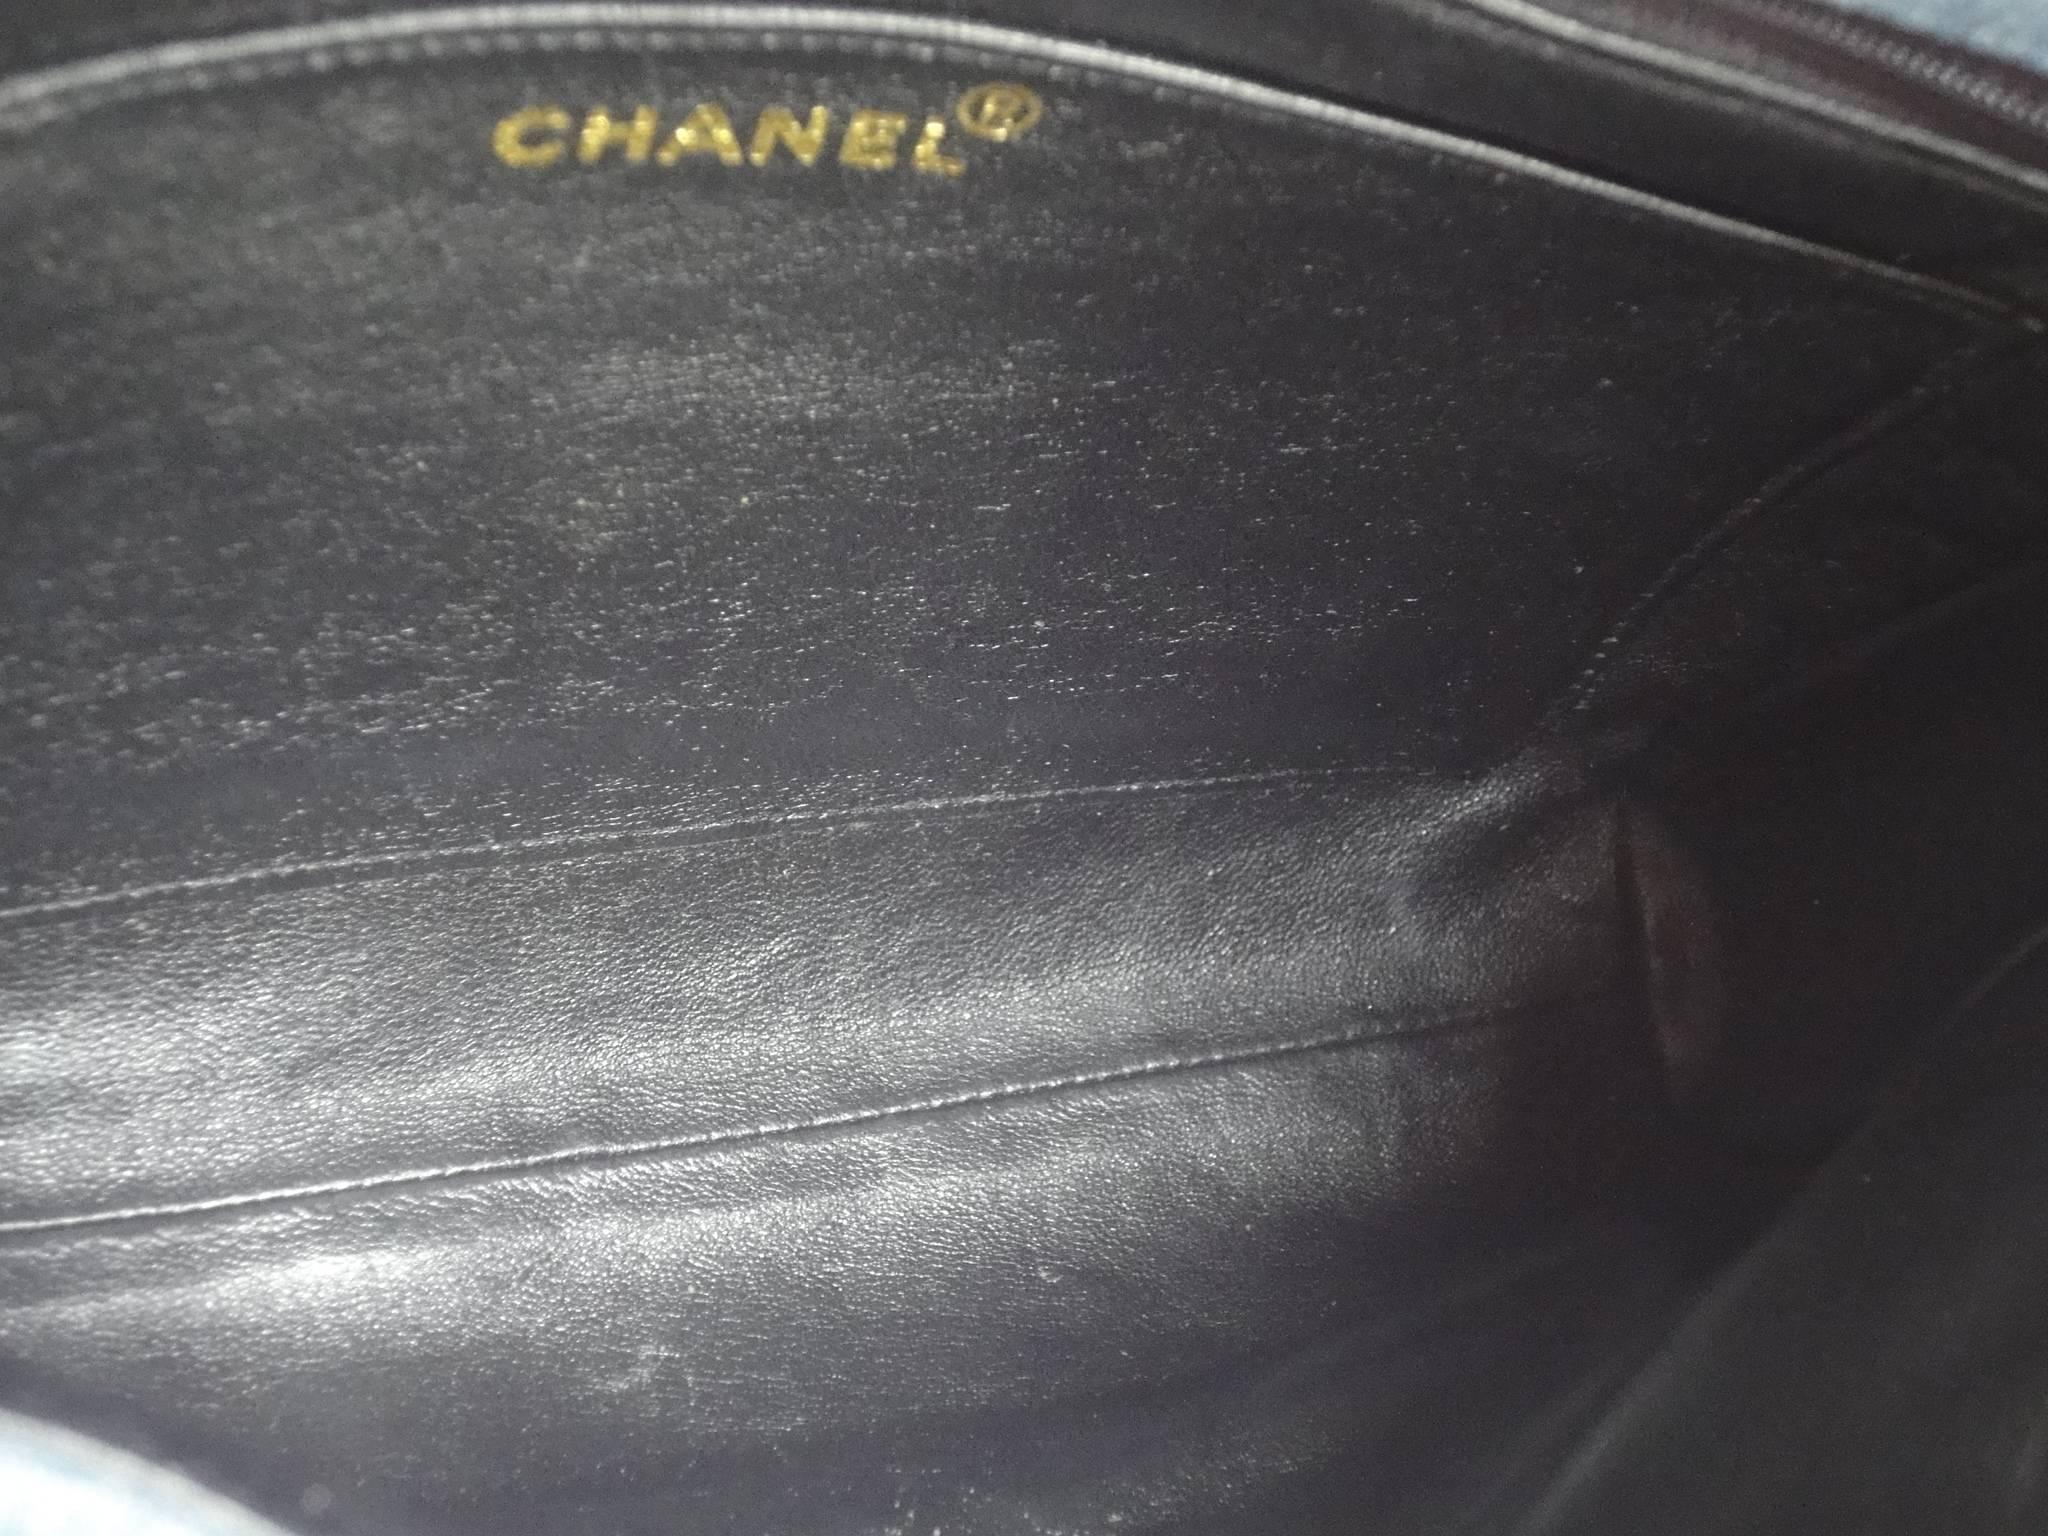 Vintage CHANEL denim bag with golden cc closure and vertical stitches.  2